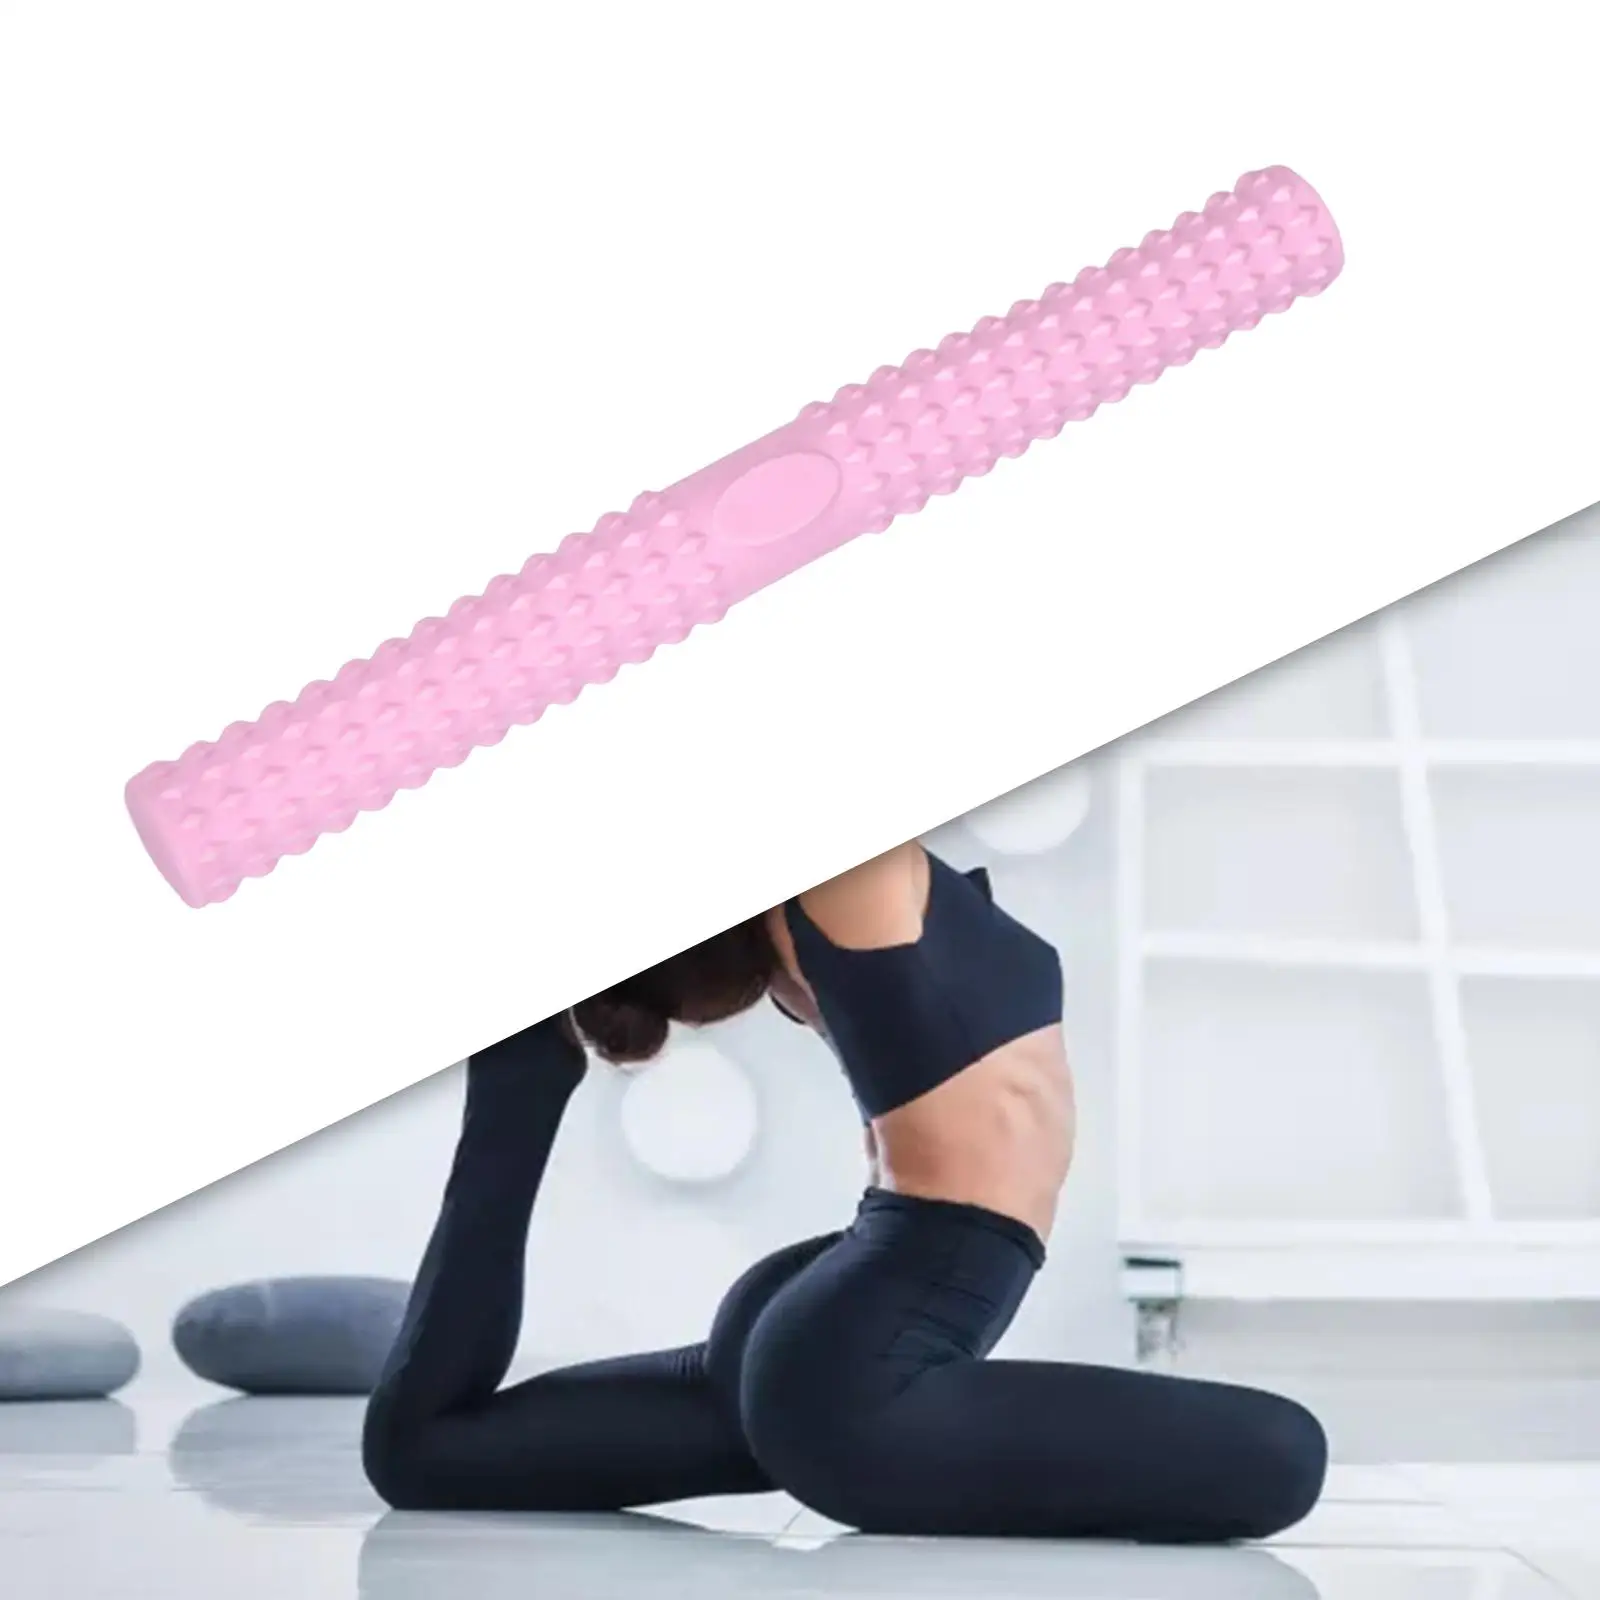 Twist Exerciser Bars Exercise Equipment Muscle Roller Tool Portable Workout Massage Roller Stick for Legs Travel Back Calf Body